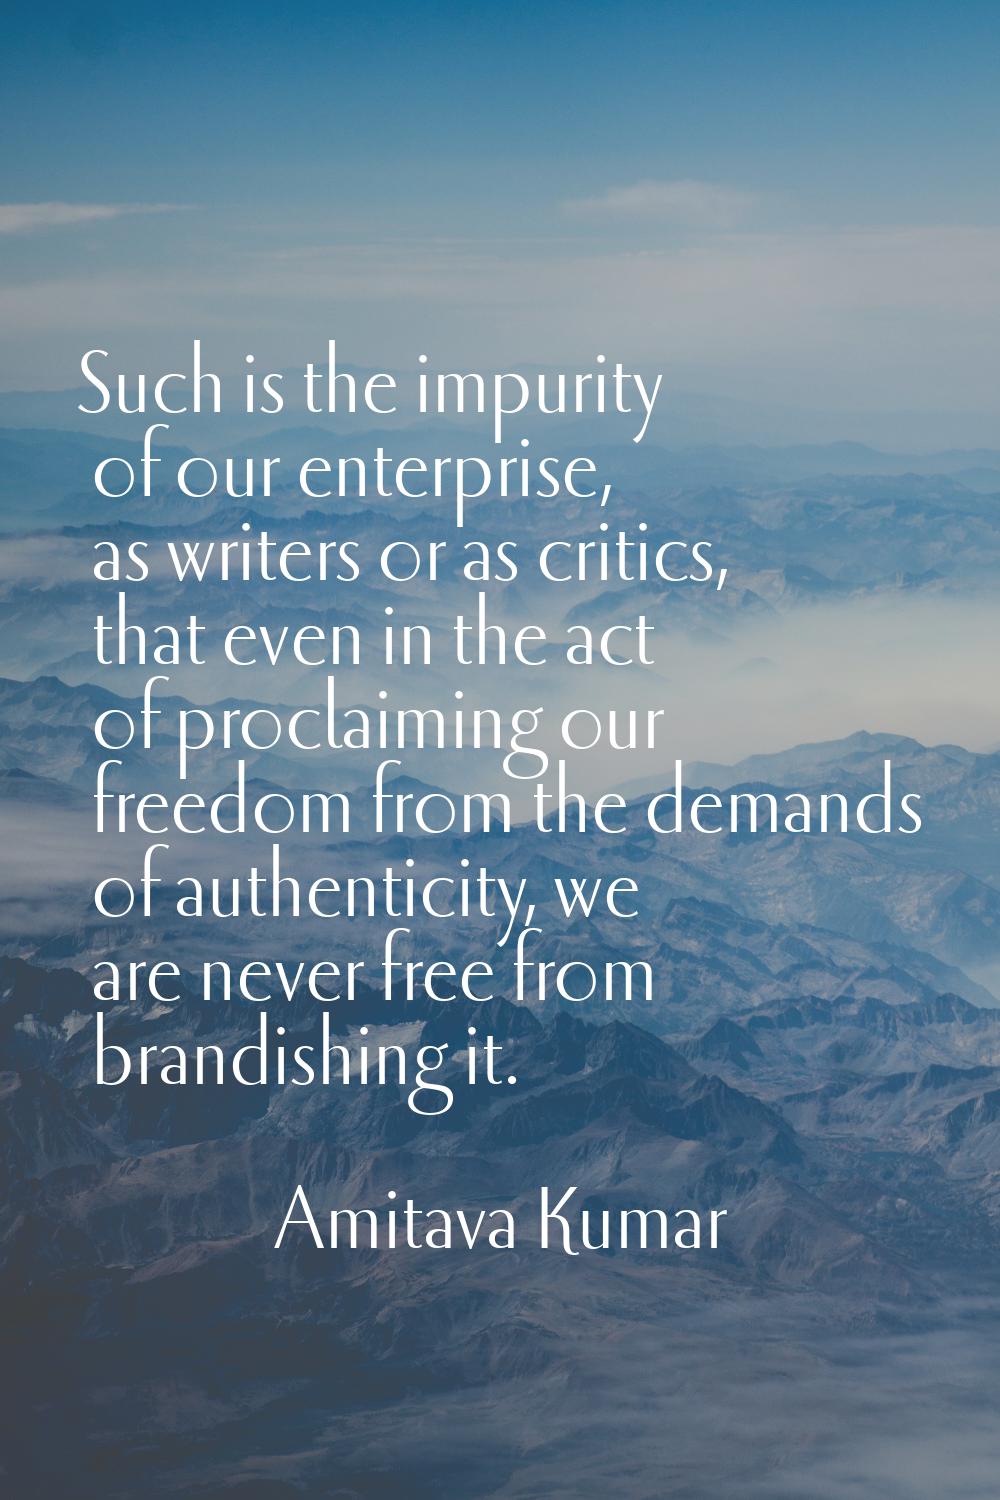 Such is the impurity of our enterprise, as writers or as critics, that even in the act of proclaimi